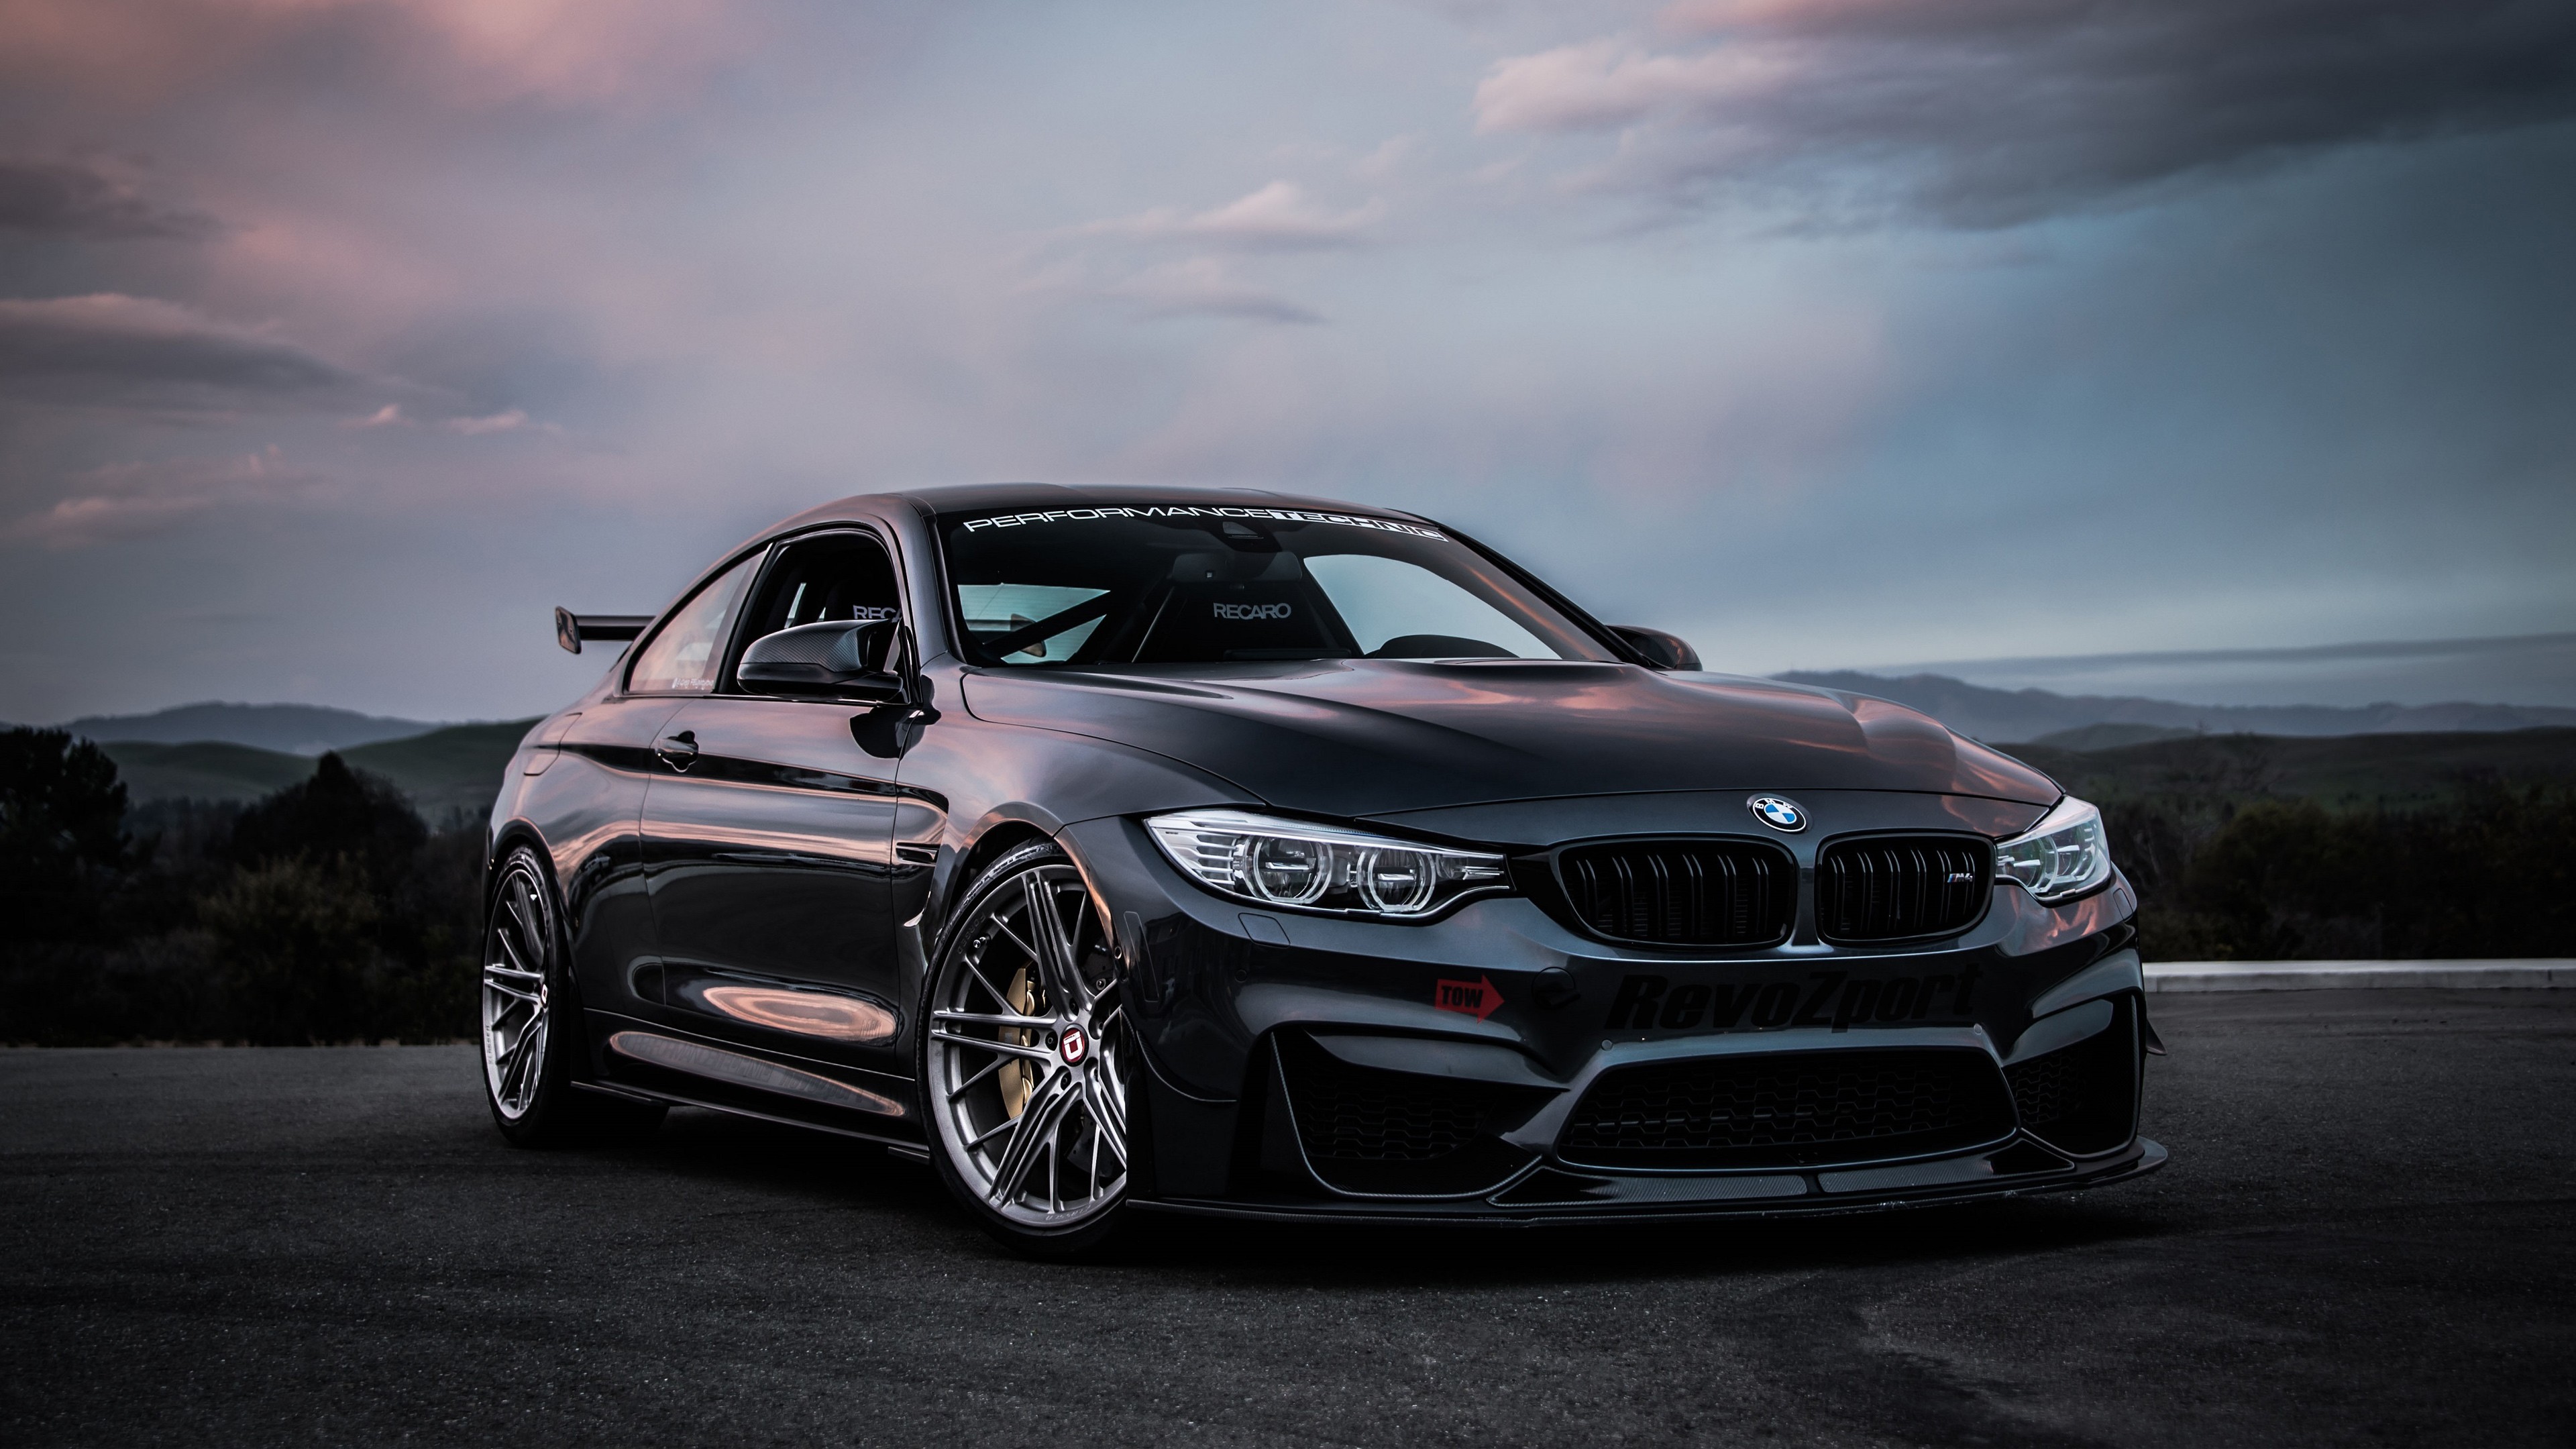 Negro Bmw m 3 Coupe. Wallpaper in 3840x2160 Resolution